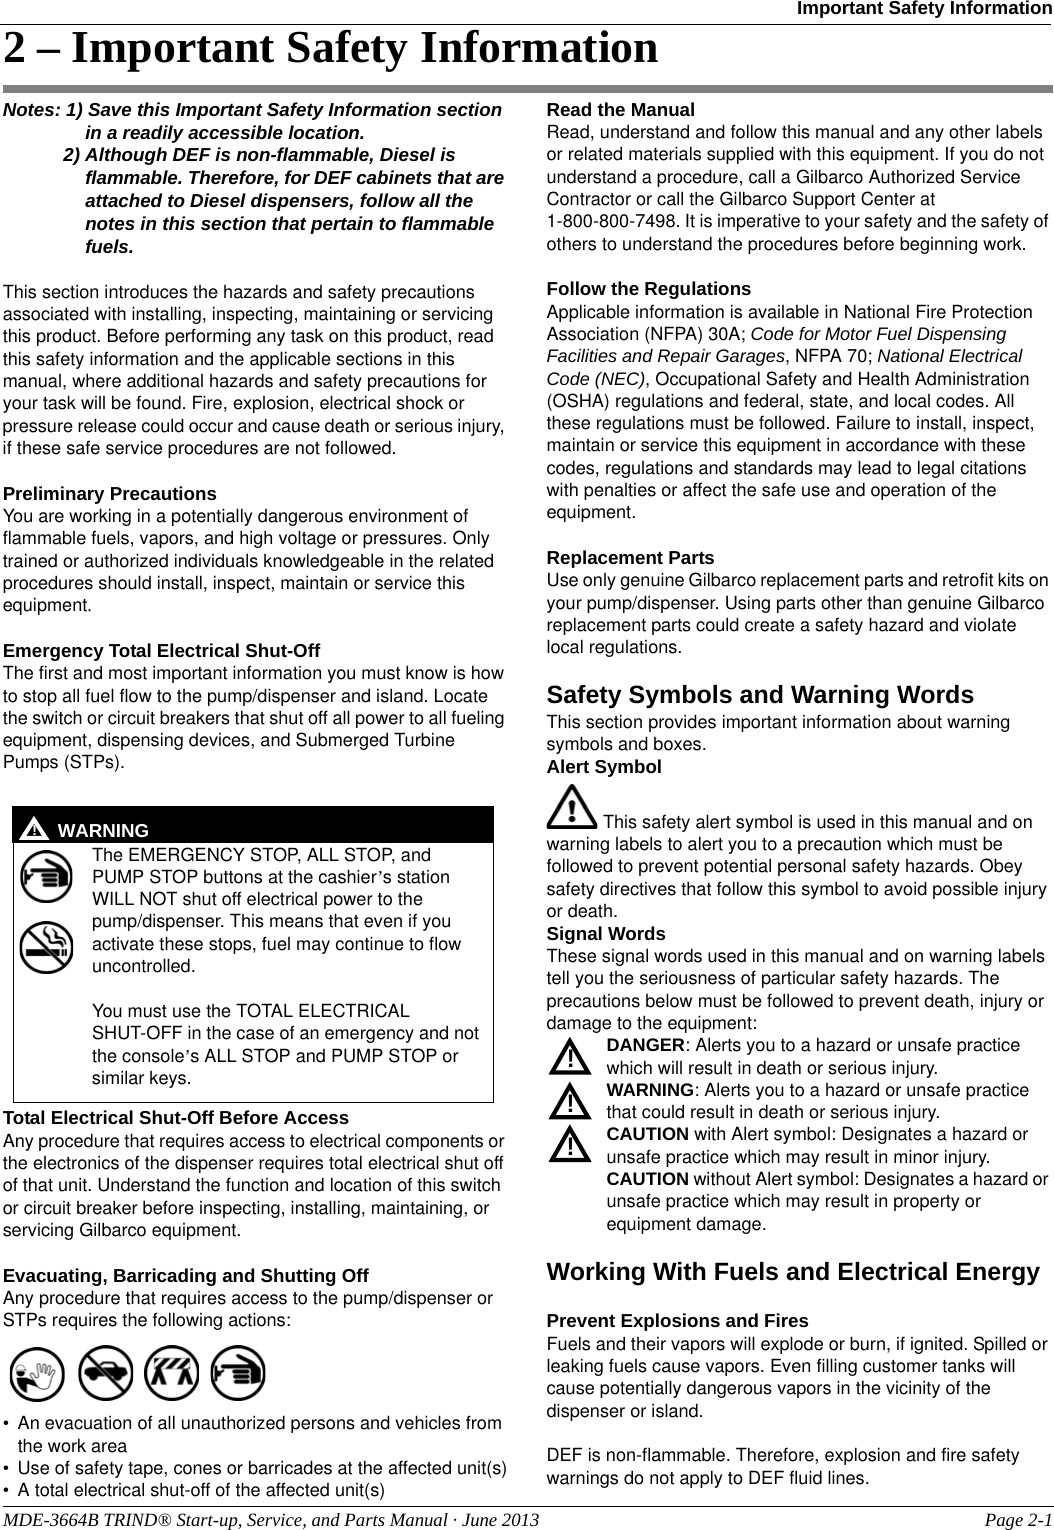 MDE-3664B TRIND® Start-up, Service, and Parts Manual · June 2013 Page 2-1Important Safety Information2 – Important Safety InformationNotes: 1) Save this Important Safety Information section in a readily accessible location. 2) Although DEF is non-flammable, Diesel is flammable. Therefore, for DEF cabinets that are attached to Diesel dispensers, follow all the notes in this section that pertain to flammable fuels.This section introduces the hazards and safety precautions associated with installing, inspecting, maintaining or servicing this product. Before performing any task on this product, read this safety information and the applicable sections in this manual, where additional hazards and safety precautions for your task will be found. Fire, explosion, electrical shock or pressure release could occur and cause death or serious injury, if these safe service procedures are not followed. Preliminary PrecautionsYou are working in a potentially dangerous environment of flammable fuels, vapors, and high voltage or pressures. Only trained or authorized individuals knowledgeable in the related procedures should install, inspect, maintain or service this equipment.Emergency Total Electrical Shut-OffThe first and most important information you must know is how to stop all fuel flow to the pump/dispenser and island. Locate the switch or circuit breakers that shut off all power to all fueling equipment, dispensing devices, and Submerged Turbine Pumps (STPs).  The EMERGENCY STOP, ALL STOP, and PUMP STOP buttons at the cashier’s station WILL NOT shut off electrical power to the pump/dispenser. This means that even if you activate these stops, fuel may continue to flow uncontrolled. You must use the TOTAL ELECTRICAL SHUT-OFF in the case of an emergency and not the console’s ALL STOP and PUMP STOP or similar keys.!WARNING!Total Electrical Shut-Off Before AccessAny procedure that requires access to electrical components or the electronics of the dispenser requires total electrical shut off of that unit. Understand the function and location of this switch or circuit breaker before inspecting, installing, maintaining, or servicing Gilbarco equipment.Evacuating, Barricading and Shutting OffAny procedure that requires access to the pump/dispenser or STPs requires the following actions:• An evacuation of all unauthorized persons and vehicles from the work area • Use of safety tape, cones or barricades at the affected unit(s)• A total electrical shut-off of the affected unit(s)Read the ManualRead, understand and follow this manual and any other labels or related materials supplied with this equipment. If you do not understand a procedure, call a Gilbarco Authorized Service Contractor or call the Gilbarco Support Center at 1-800-800-7498. It is imperative to your safety and the safety of others to understand the procedures before beginning work.Follow the RegulationsApplicable information is available in National Fire Protection Association (NFPA) 30A; Code for Motor Fuel Dispensing Facilities and Repair Garages, NFPA 70; National Electrical Code (NEC), Occupational Safety and Health Administration (OSHA) regulations and federal, state, and local codes. All these regulations must be followed. Failure to install, inspect, maintain or service this equipment in accordance with these codes, regulations and standards may lead to legal citations with penalties or affect the safe use and operation of the equipment.Replacement PartsUse only genuine Gilbarco replacement parts and retrofit kits on your pump/dispenser. Using parts other than genuine Gilbarco replacement parts could create a safety hazard and violate local regulations.Safety Symbols and Warning WordsThis section provides important information about warning symbols and boxes.Alert Symbol This safety alert symbol is used in this manual and on warning labels to alert you to a precaution which must be followed to prevent potential personal safety hazards. Obey safety directives that follow this symbol to avoid possible injury or death.Signal WordsThese signal words used in this manual and on warning labels tell you the seriousness of particular safety hazards. The precautions below must be followed to prevent death, injury or damage to the equipment:DANGER: Alerts you to a hazard or unsafe practice which will result in death or serious injury.WARNING: Alerts you to a hazard or unsafe practice that could result in death or serious injury. CAUTION with Alert symbol: Designates a hazard or unsafe practice which may result in minor injury.CAUTION without Alert symbol: Designates a hazard or unsafe practice which may result in property or equipment damage.Working With Fuels and Electrical EnergyPrevent Explosions and FiresFuels and their vapors will explode or burn, if ignited. Spilled or leaking fuels cause vapors. Even filling customer tanks will cause potentially dangerous vapors in the vicinity of the dispenser or island.DEF is non-flammable. Therefore, explosion and fire safety warnings do not apply to DEF fluid lines.!!!